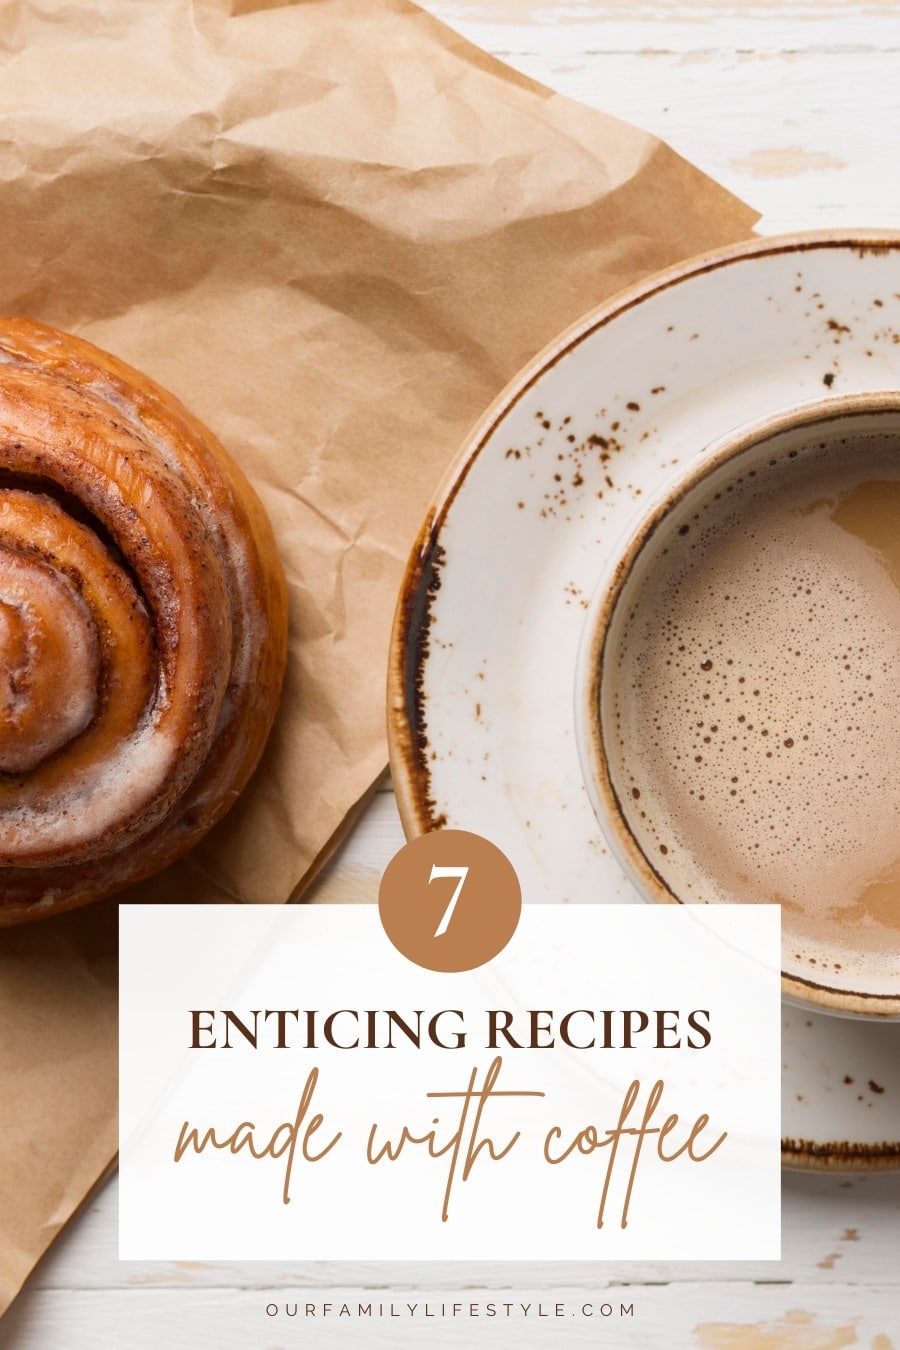 7 Enticing Recipes Made with Coffee